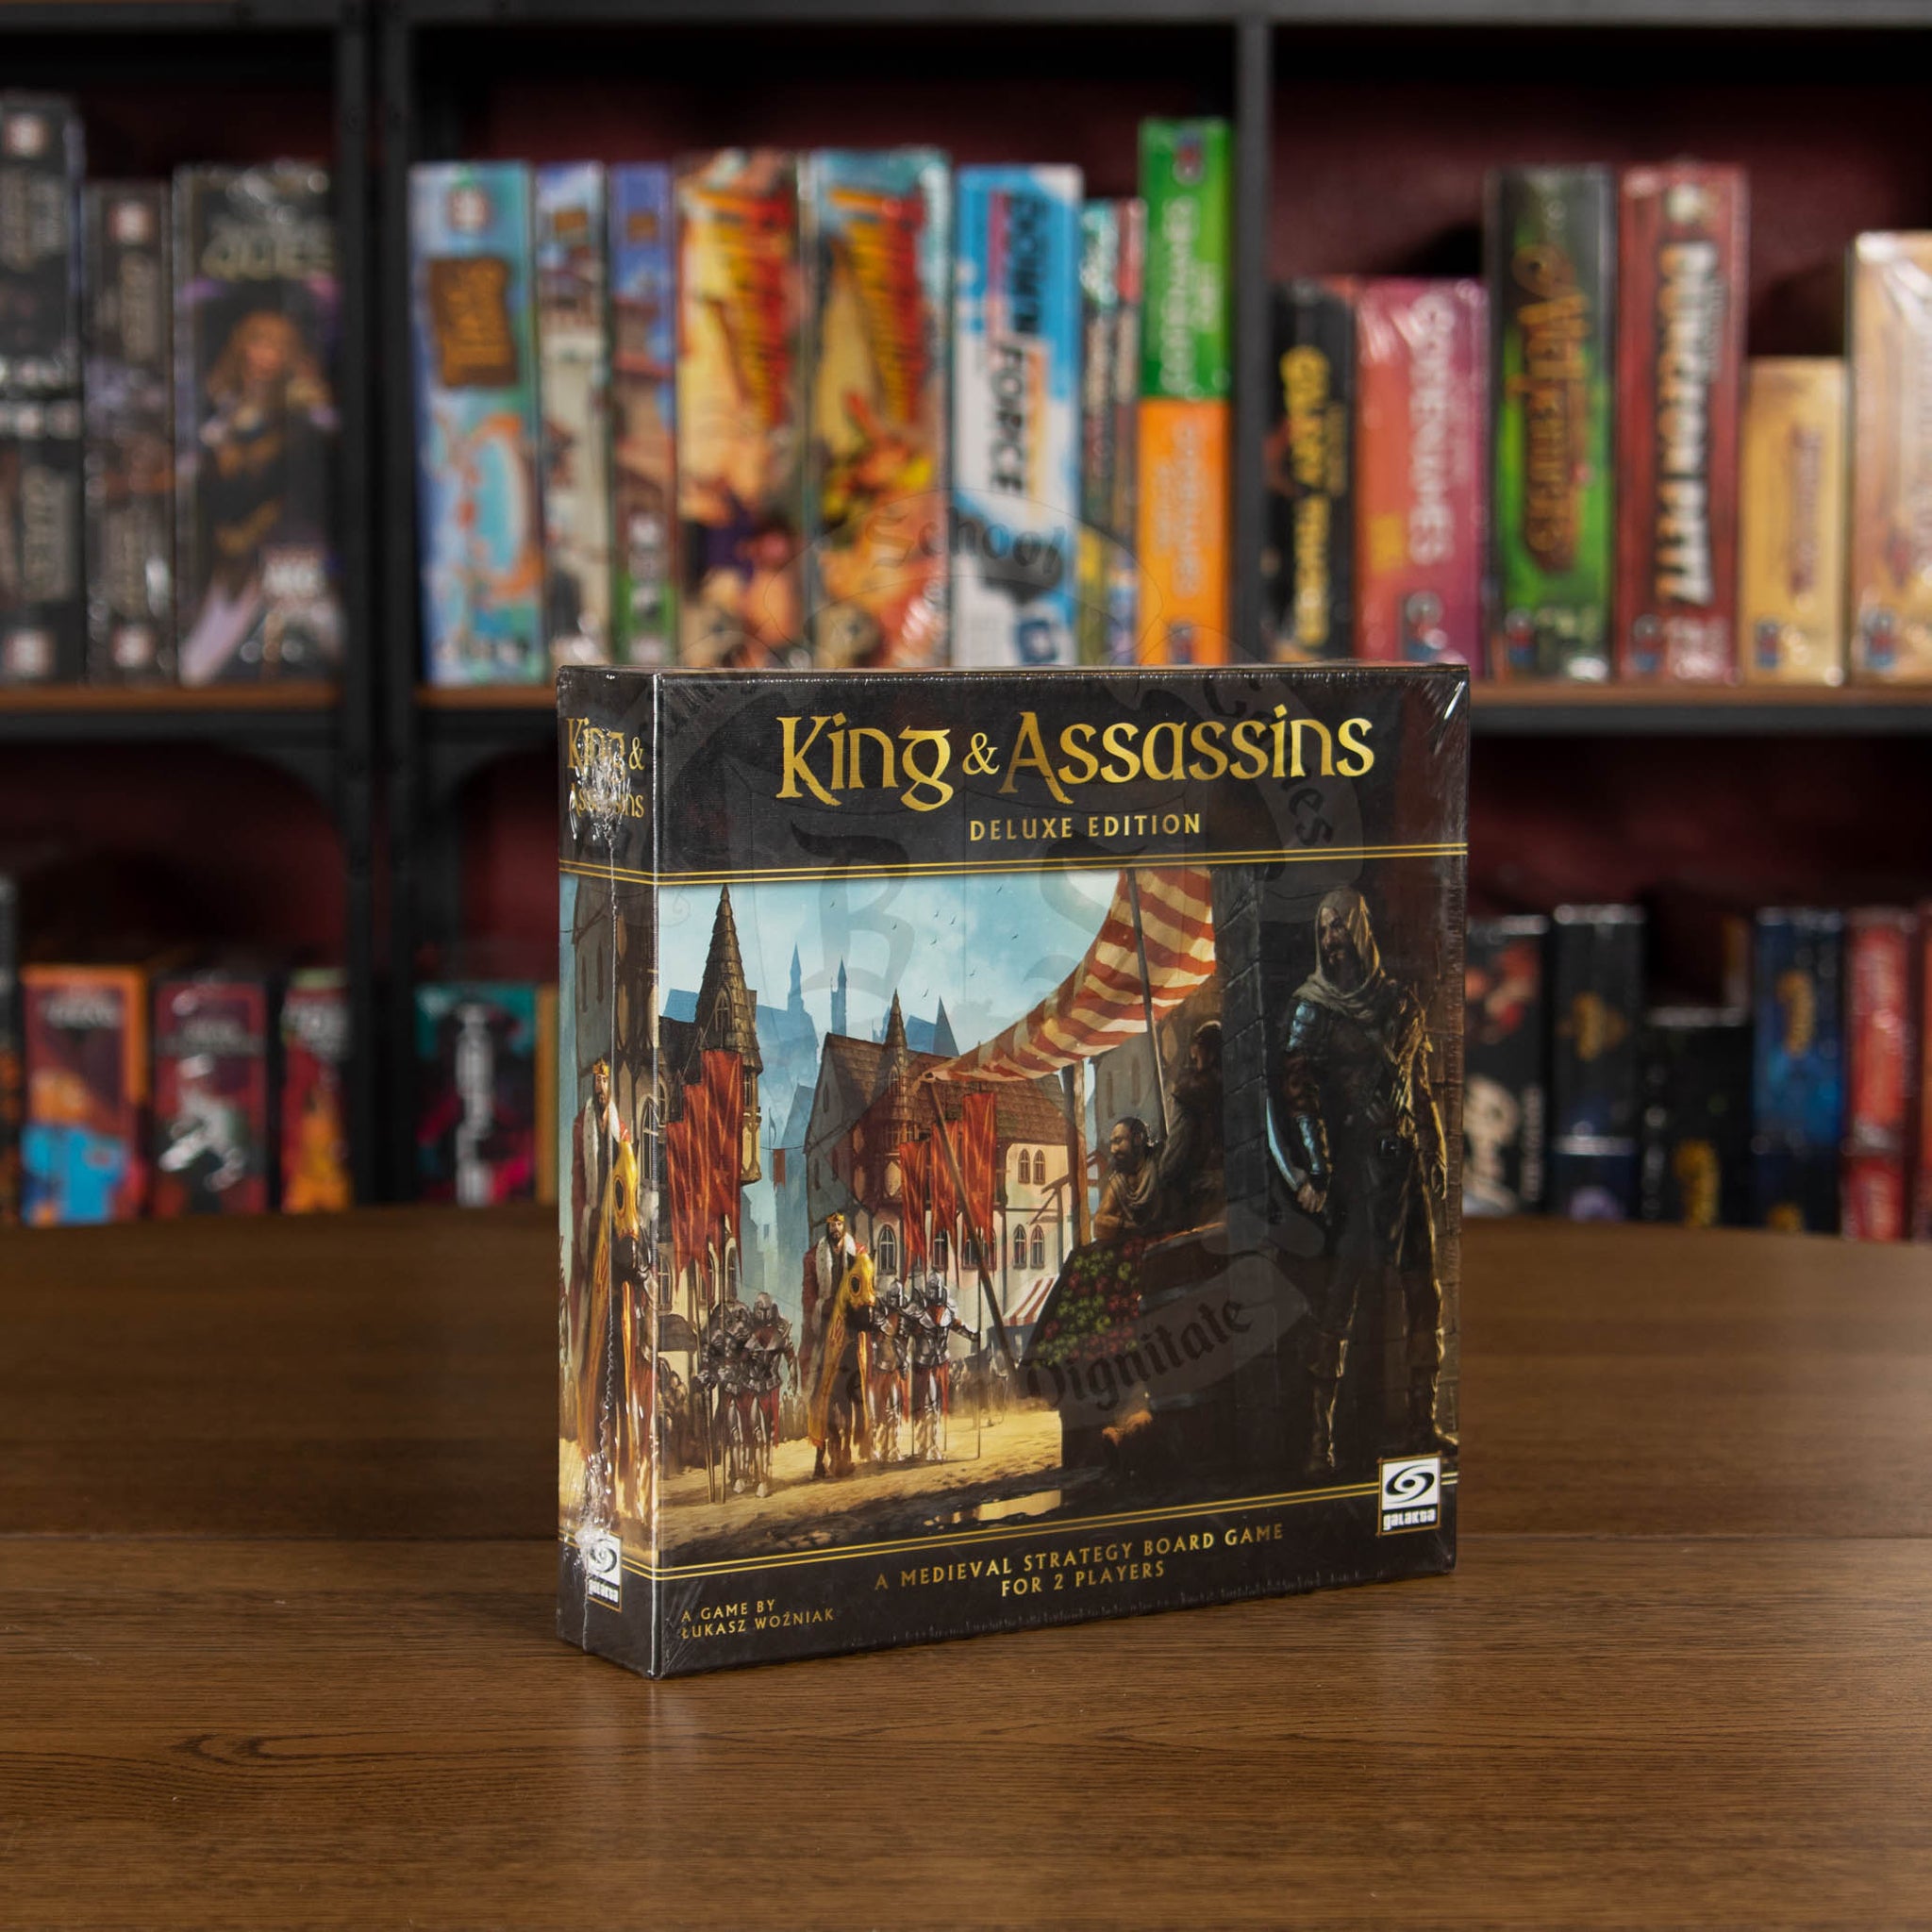 (BSG Certified USED) King & Assassins: Deluxe Edition